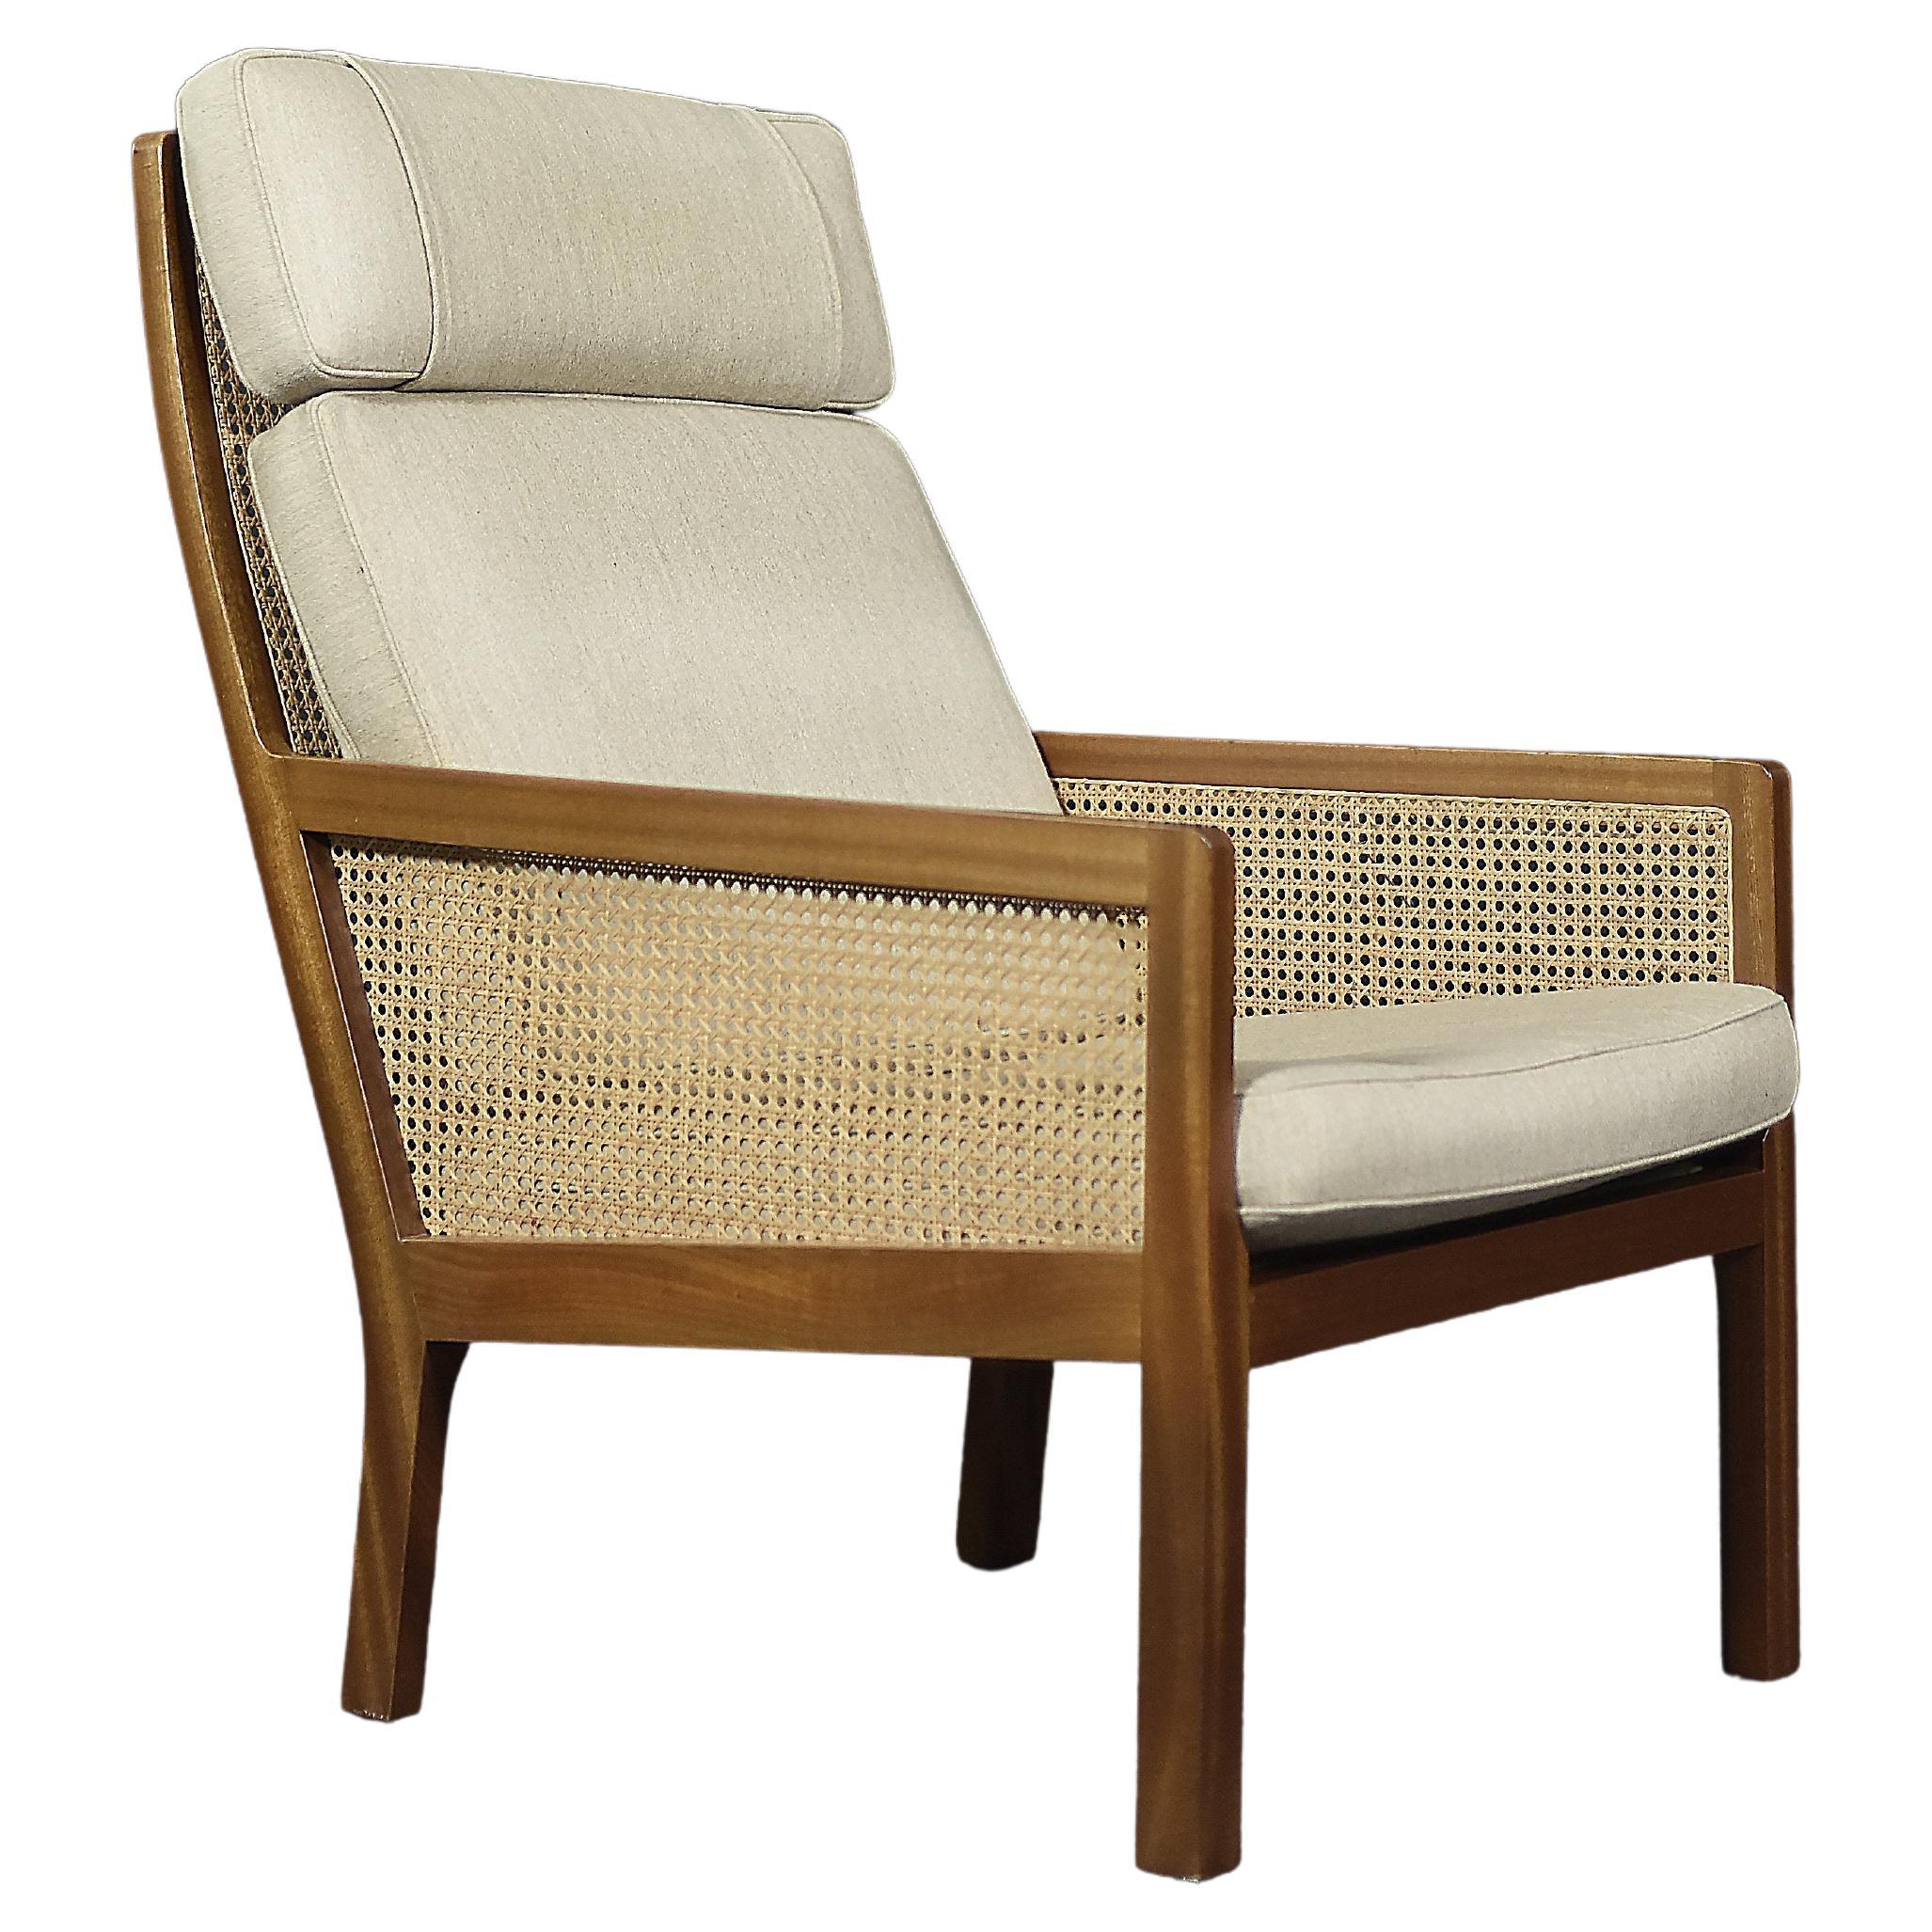 Vintage Midcentury Scandinavian Modern Mahogany Armchair with French Wicker For Sale